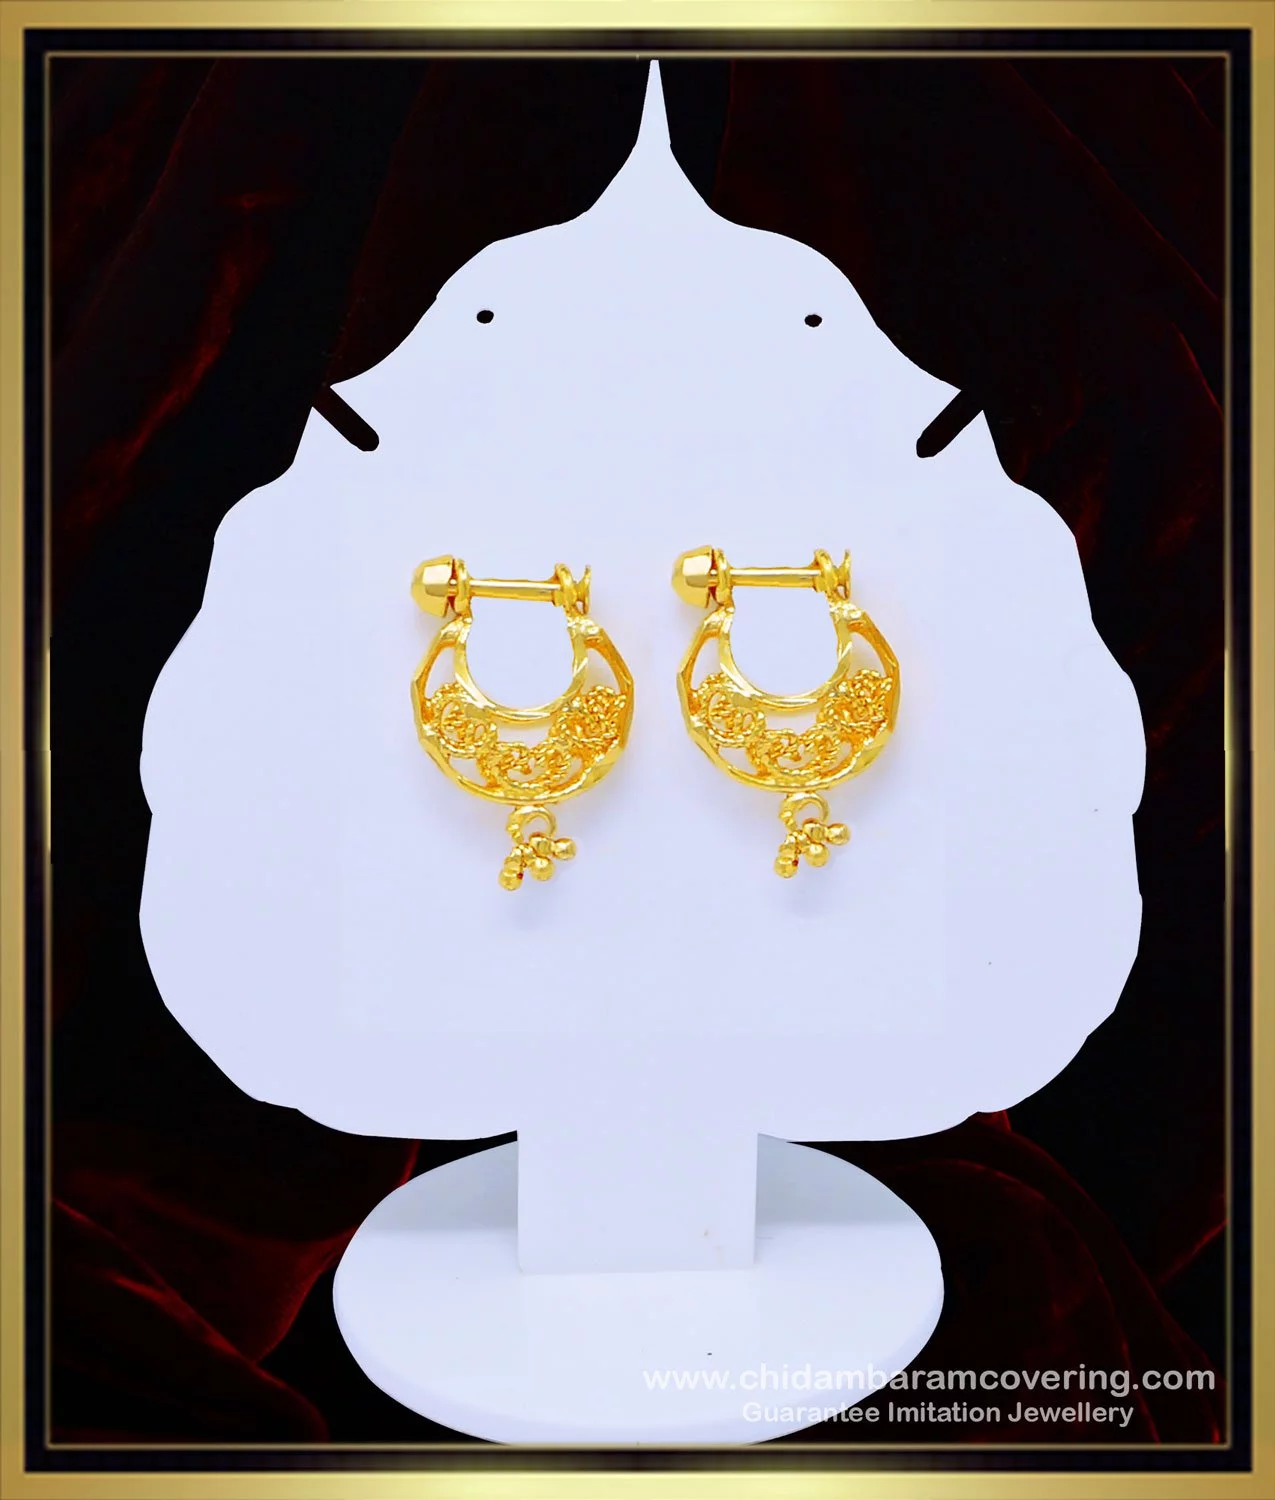 Gold Pearl Big Hoop Earring Buy Gold Pearl Big Hoop Earring Online Cheap  Jhumka Earrings Online Shopping Earrings  Shop From The Latest Collection  Of Earrings For Women  Girls Online Buy